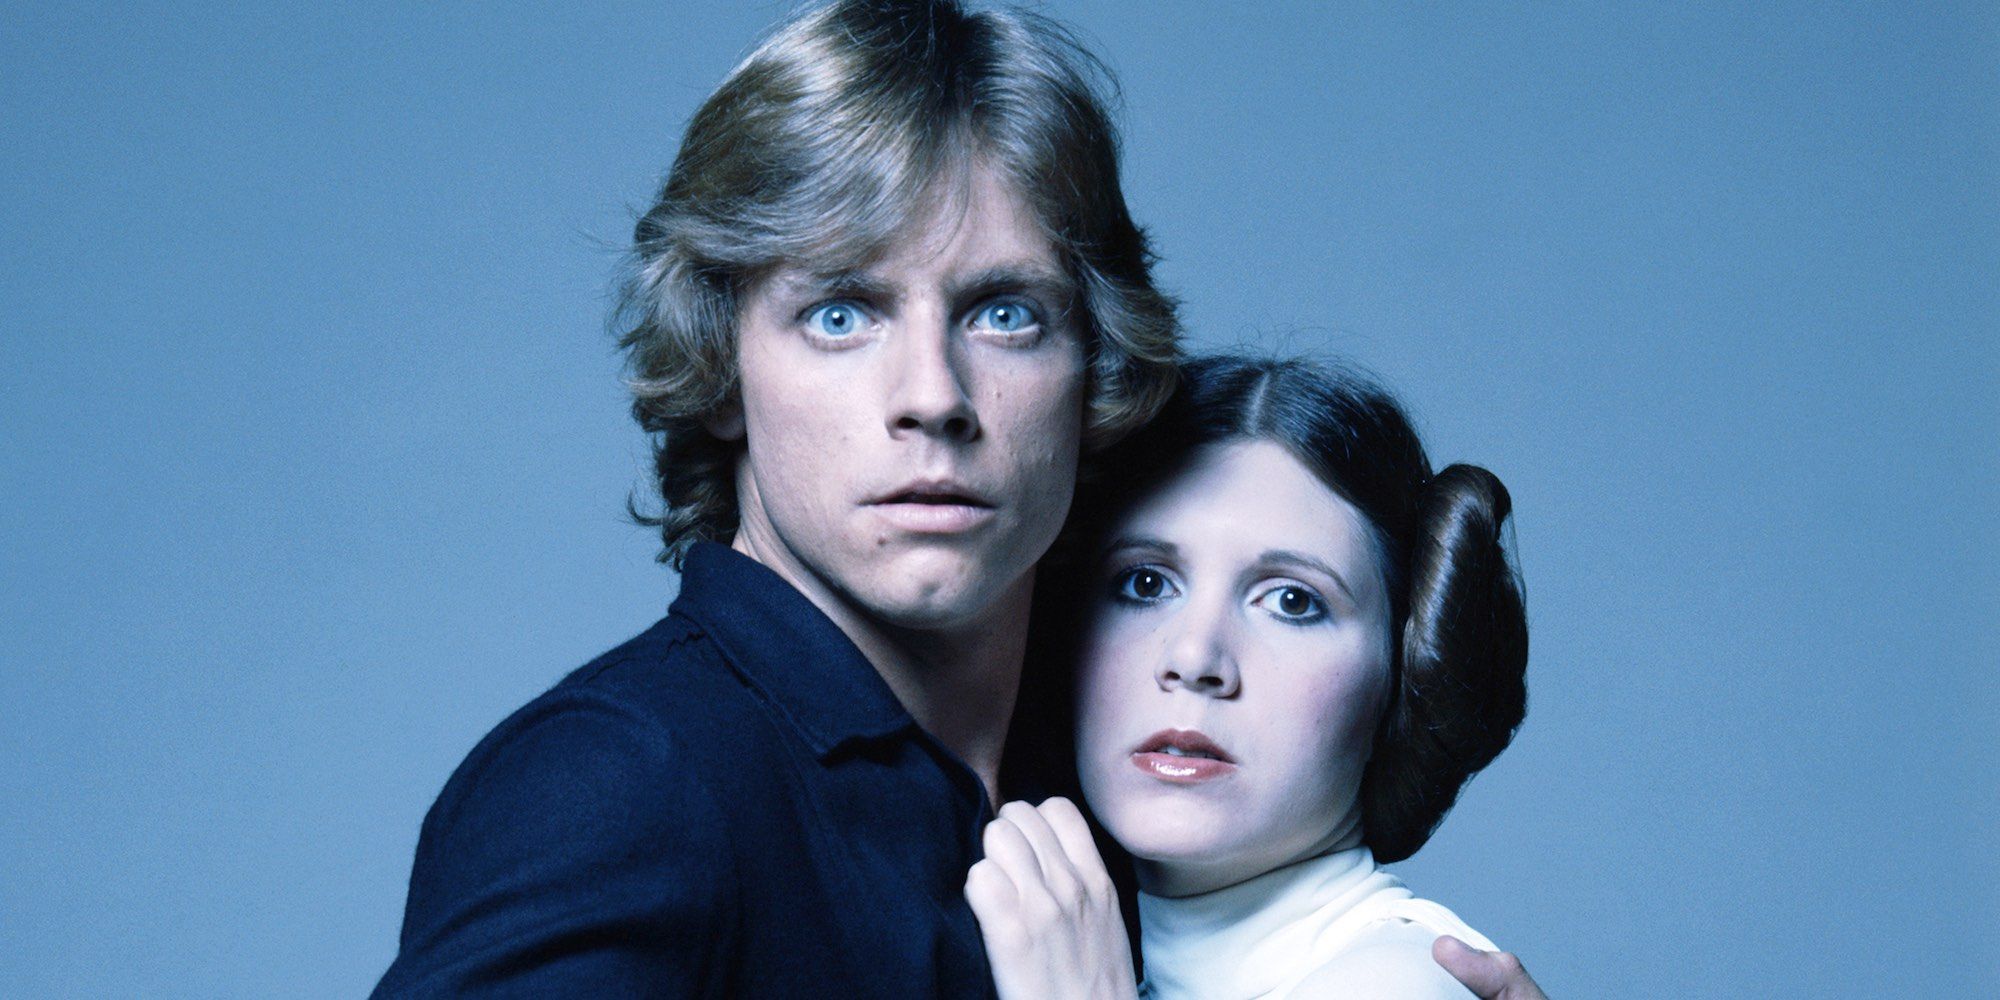 Mark Hamill as Luke Skywalker and Carrie Fisher as Princess Leia in Star Wars